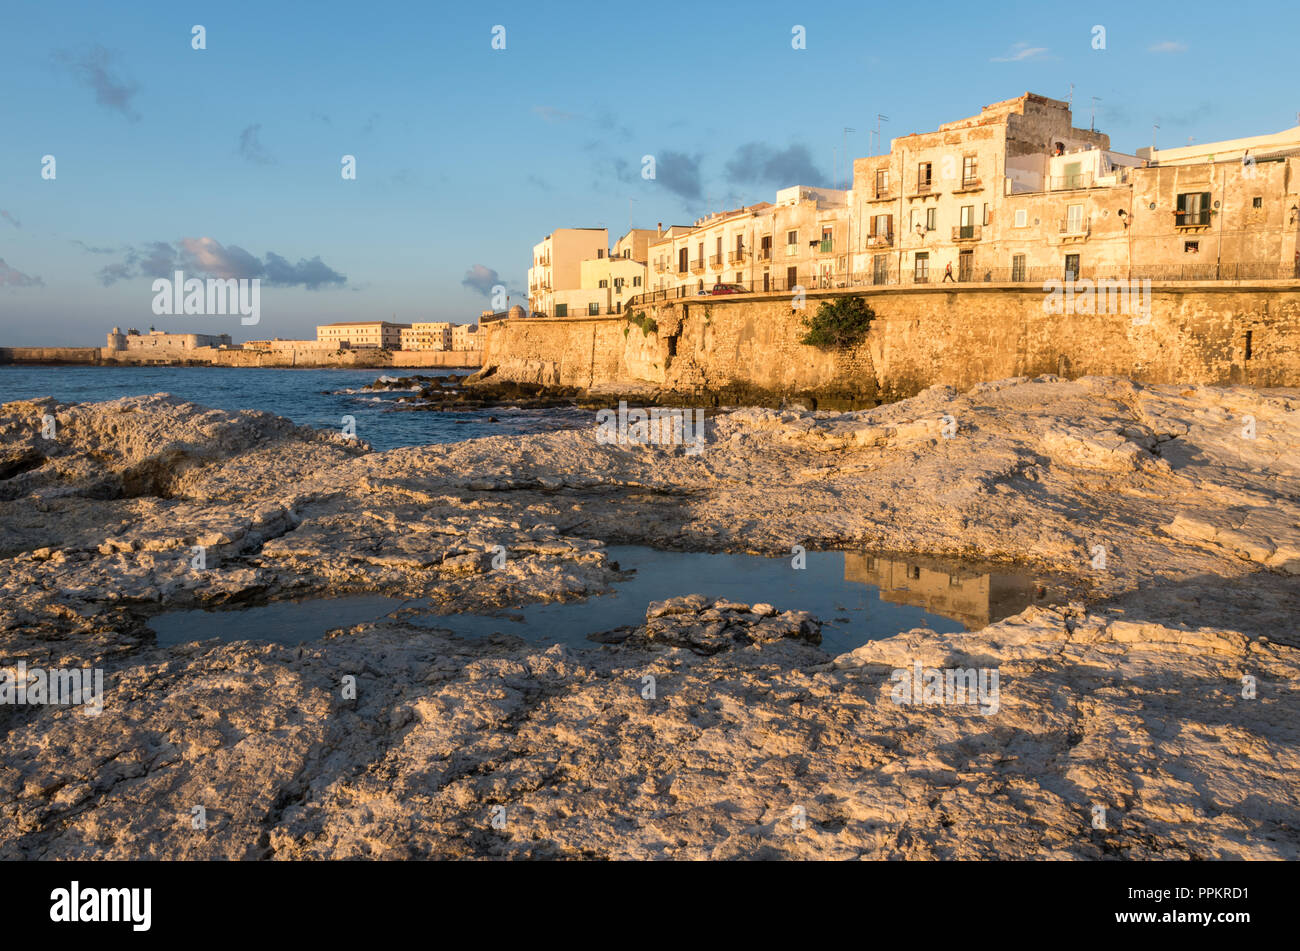 Morning on the shores of Ortygia, Syracuse City, Italy. Stock Photo